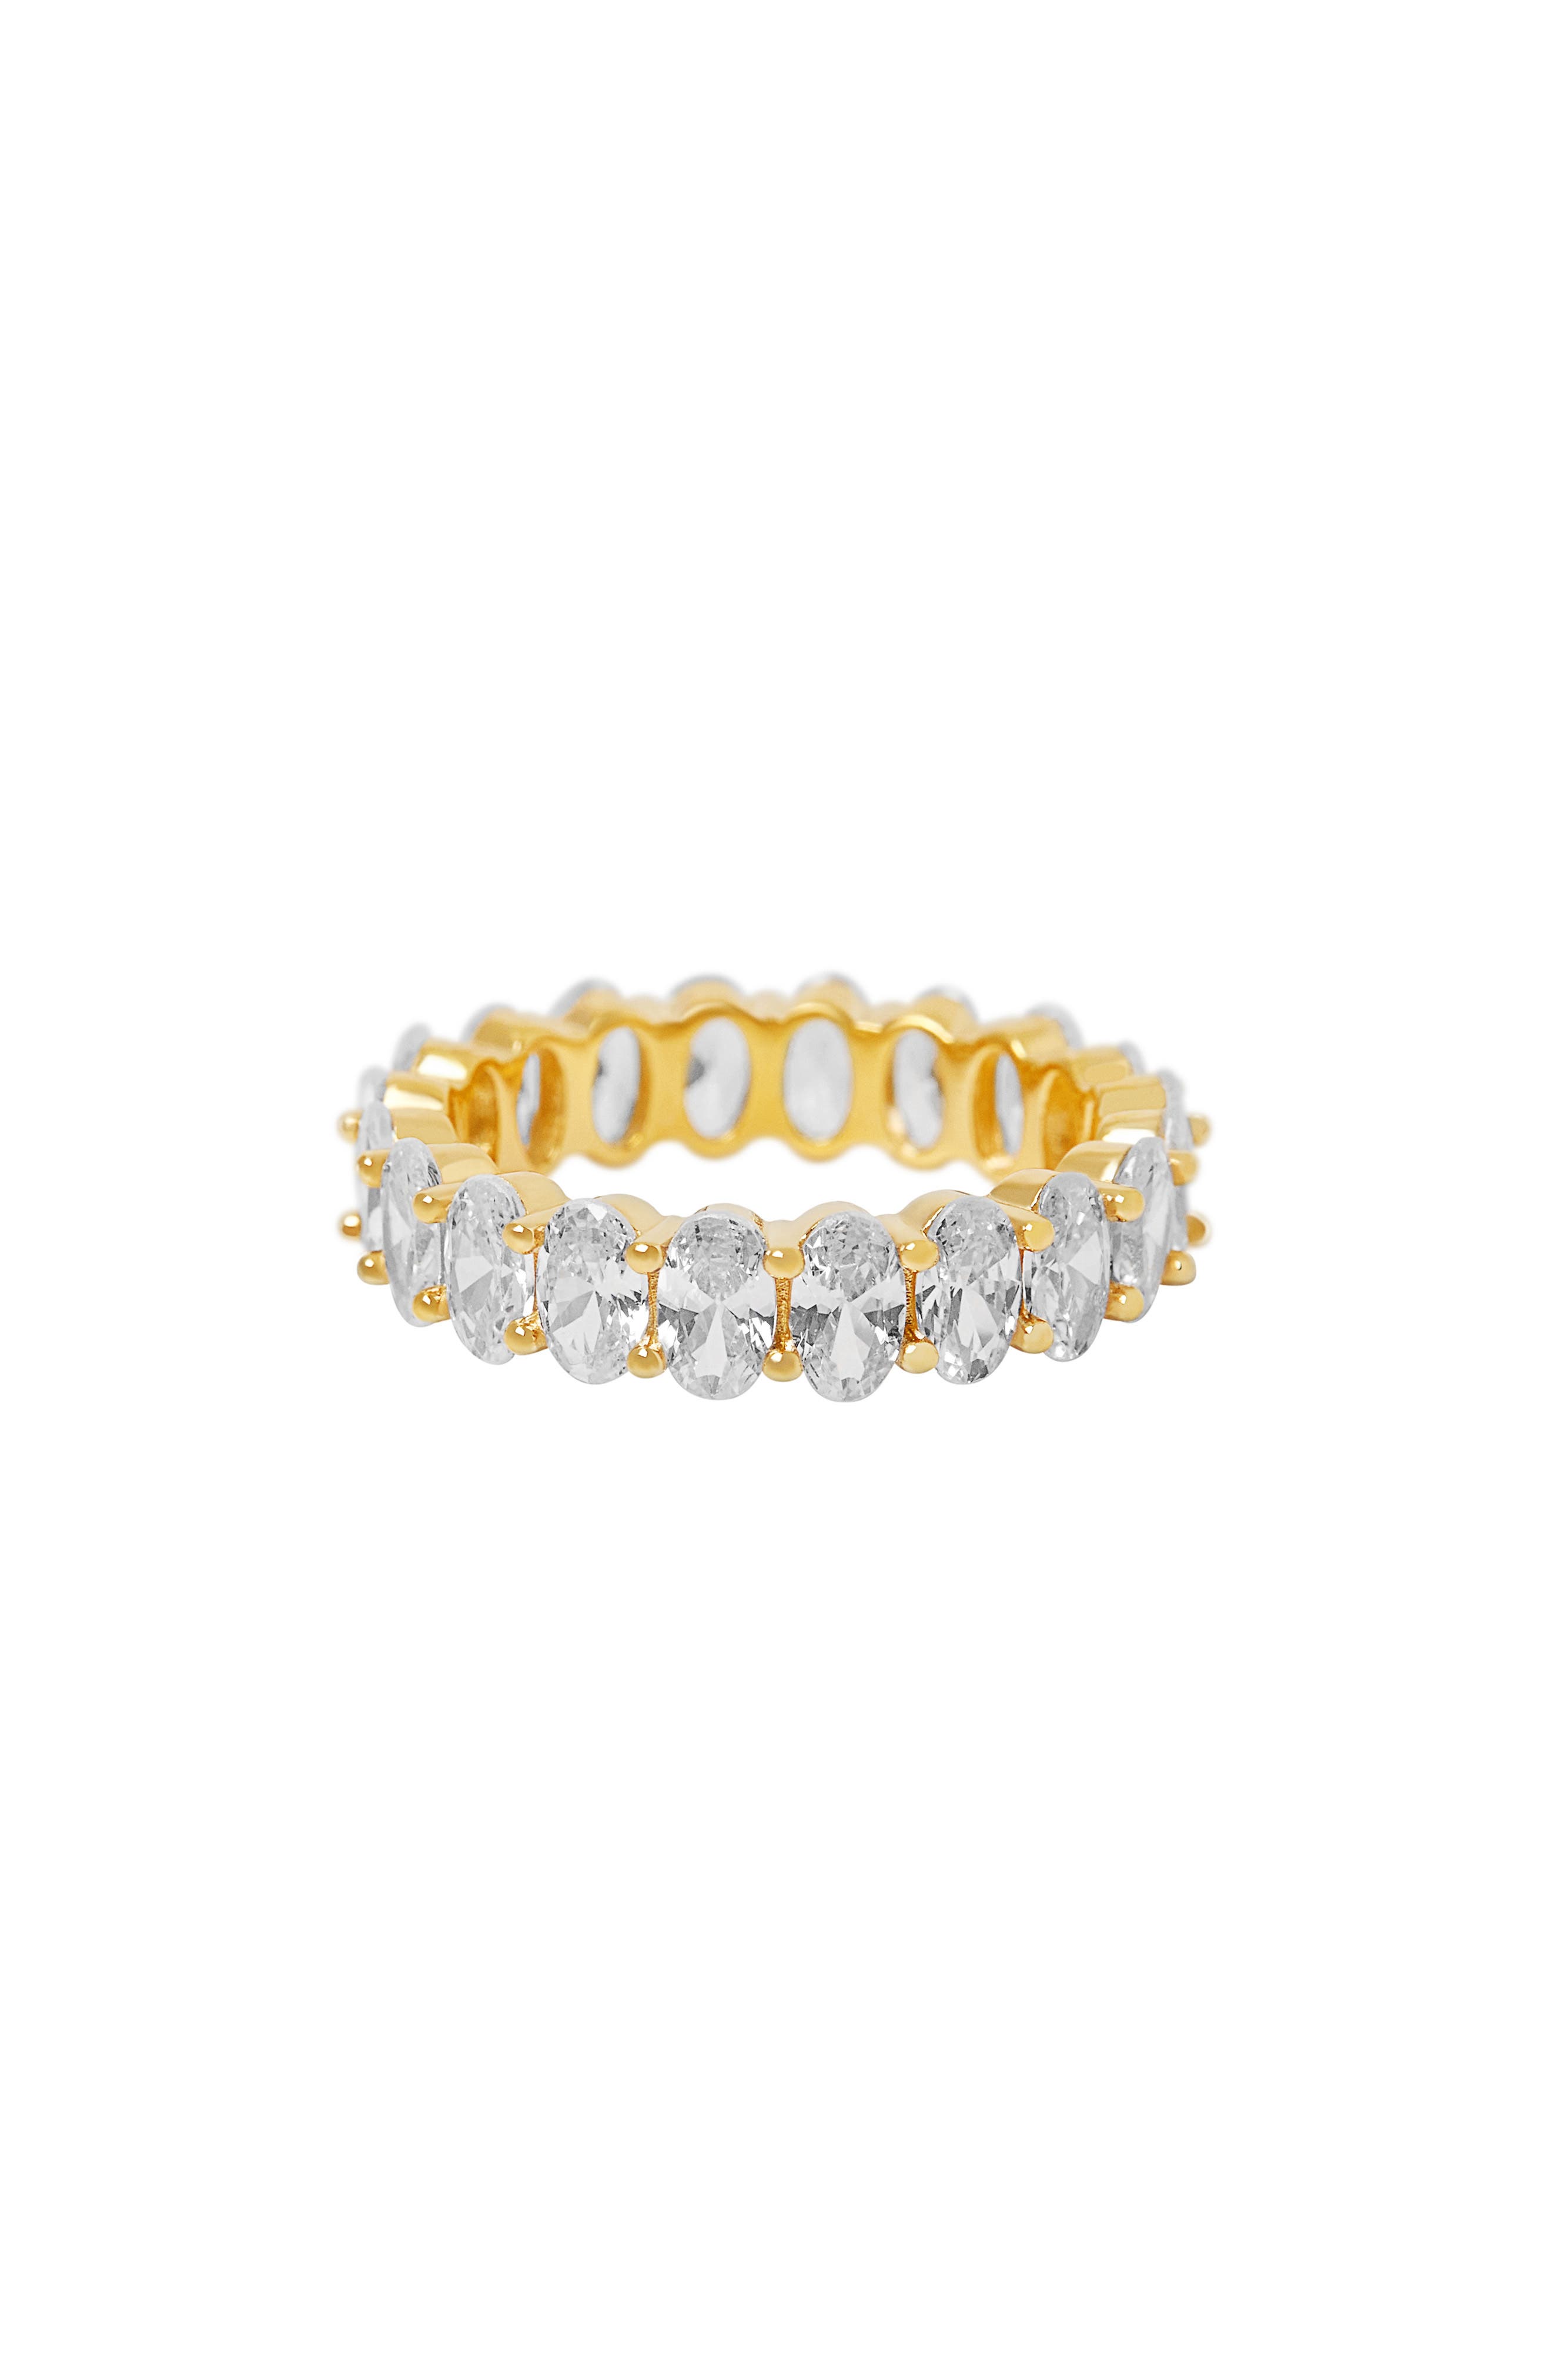 The M Jewelers The Oval Cut Eternity Ring   Nordstrom